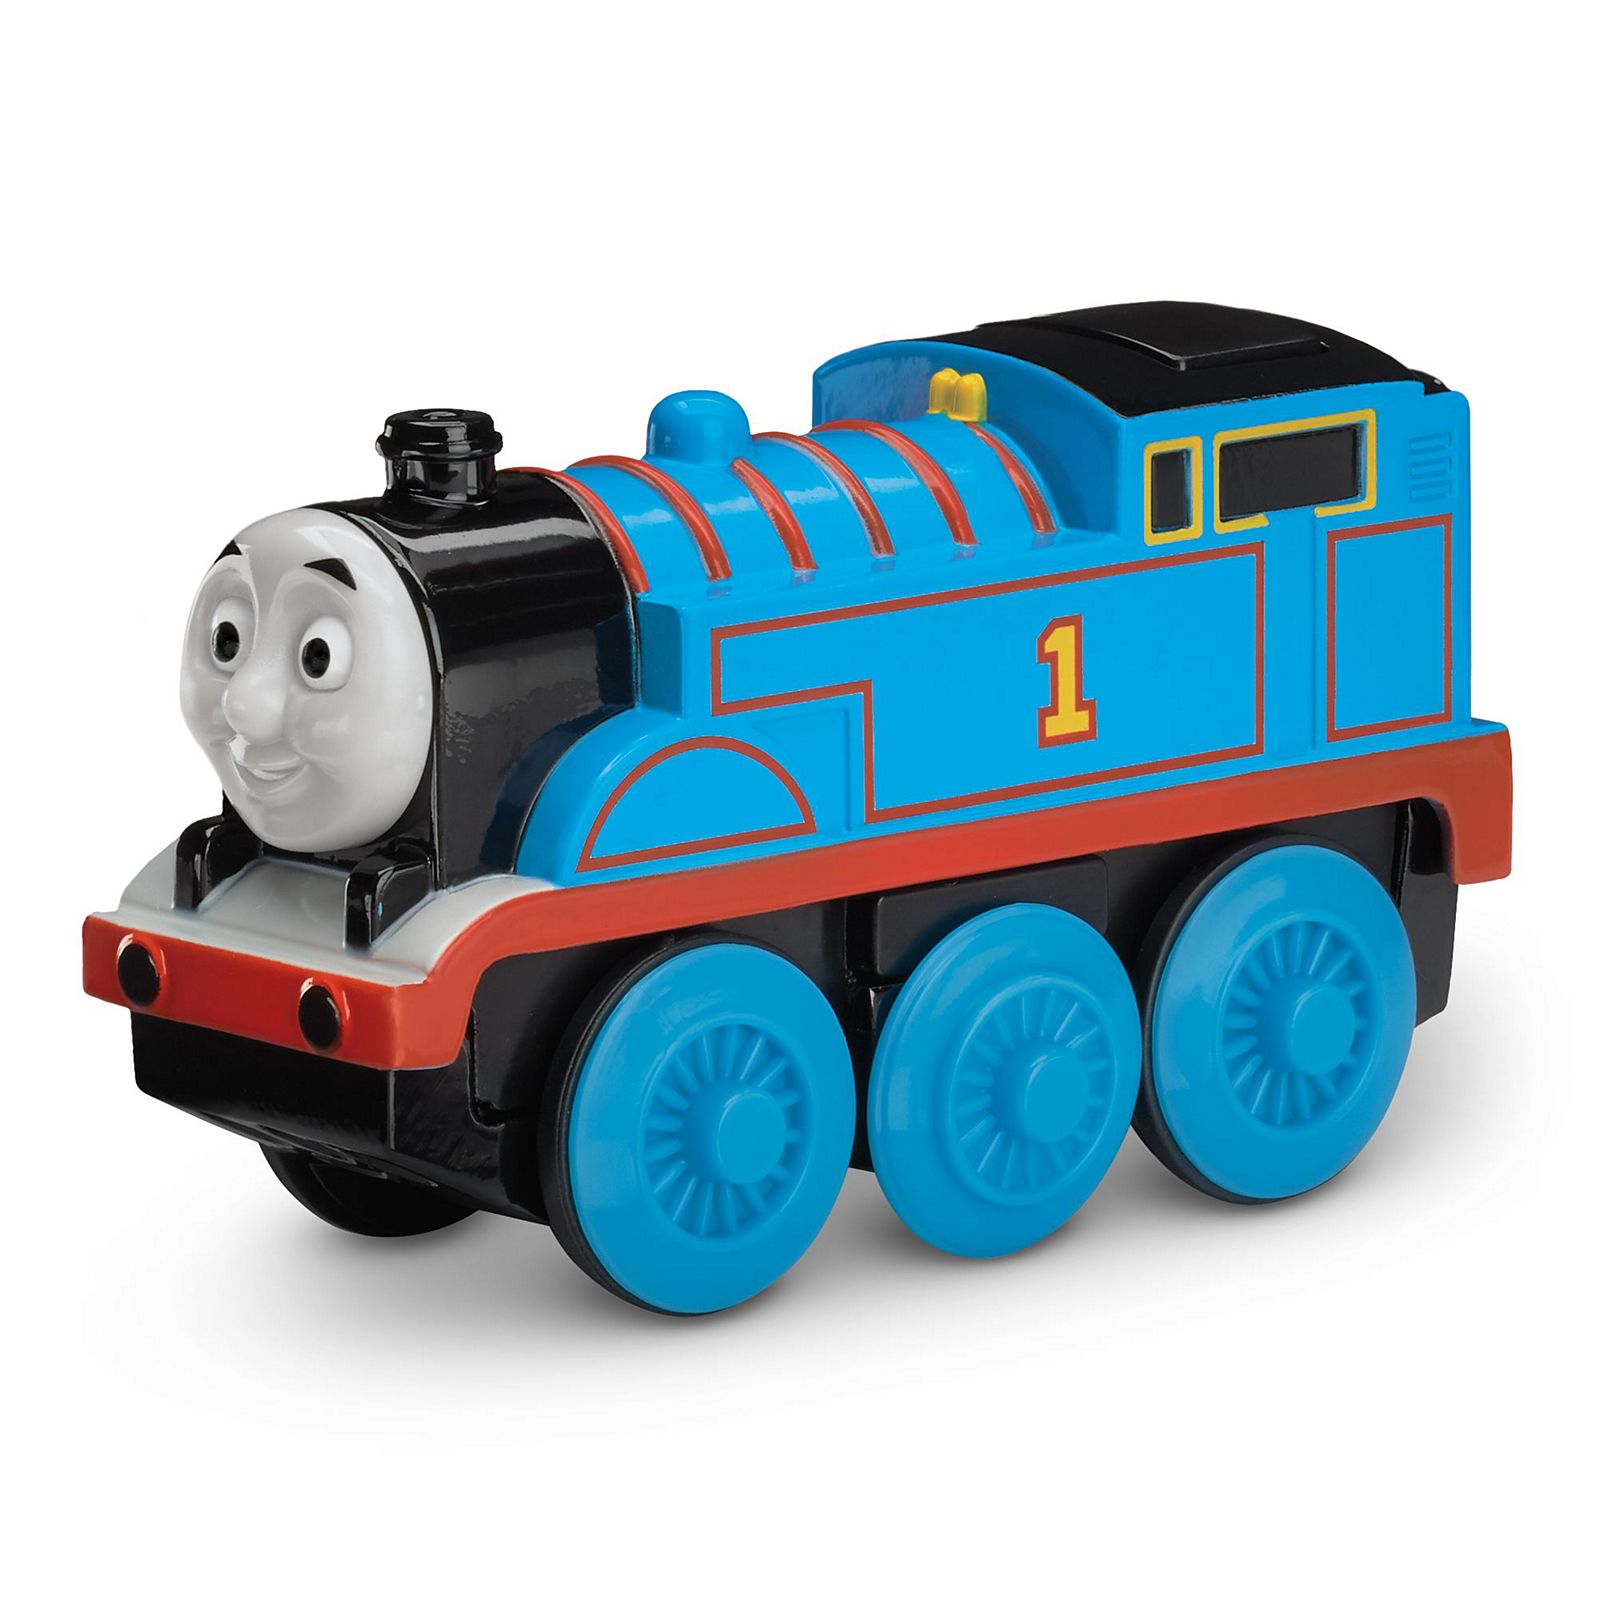 https://static.wikia.nocookie.net/thomaswoodenrailway/images/4/46/2013Battery-OperatedThomas.jpg/revision/latest?cb=20180807062036